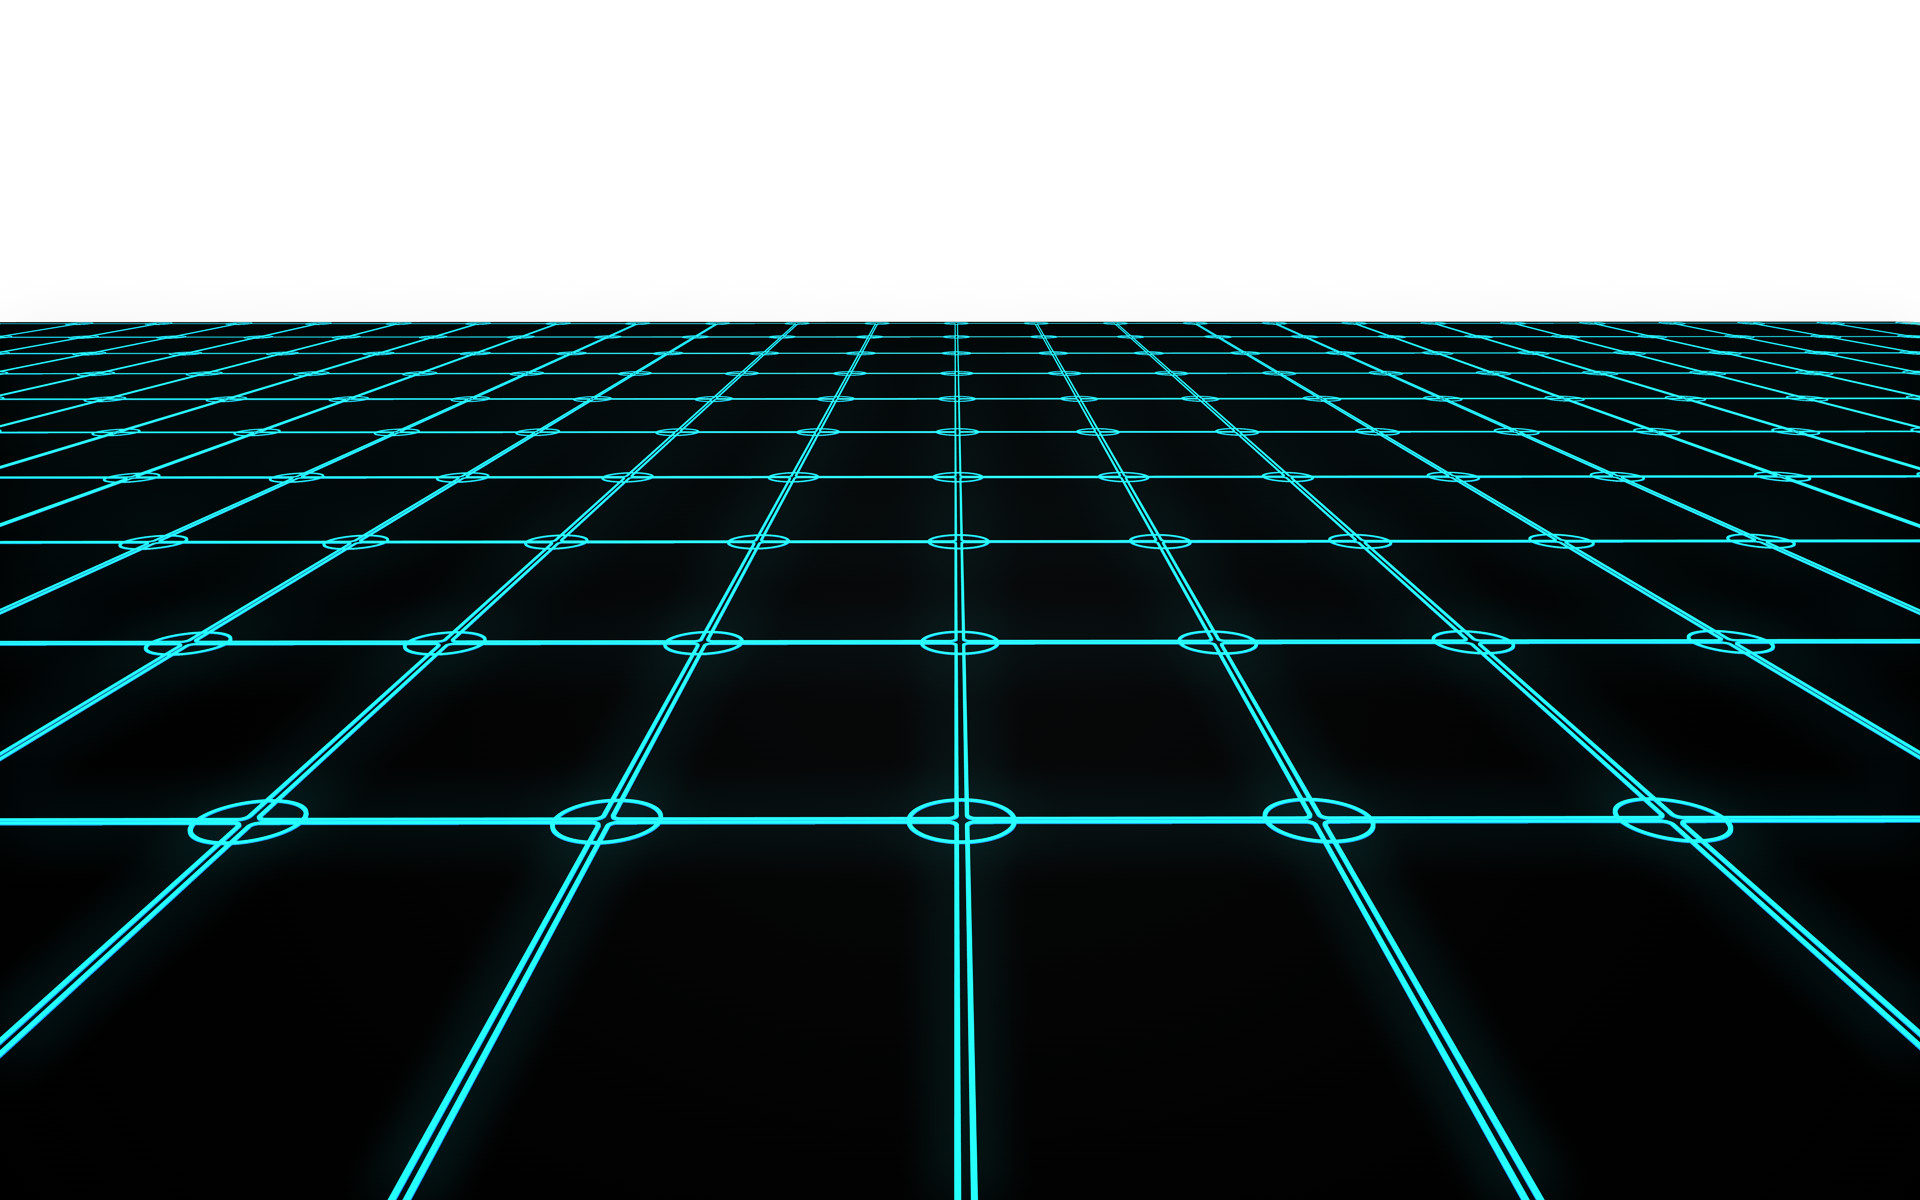 Another Tron Type Floor by Taz09 on DeviantArt